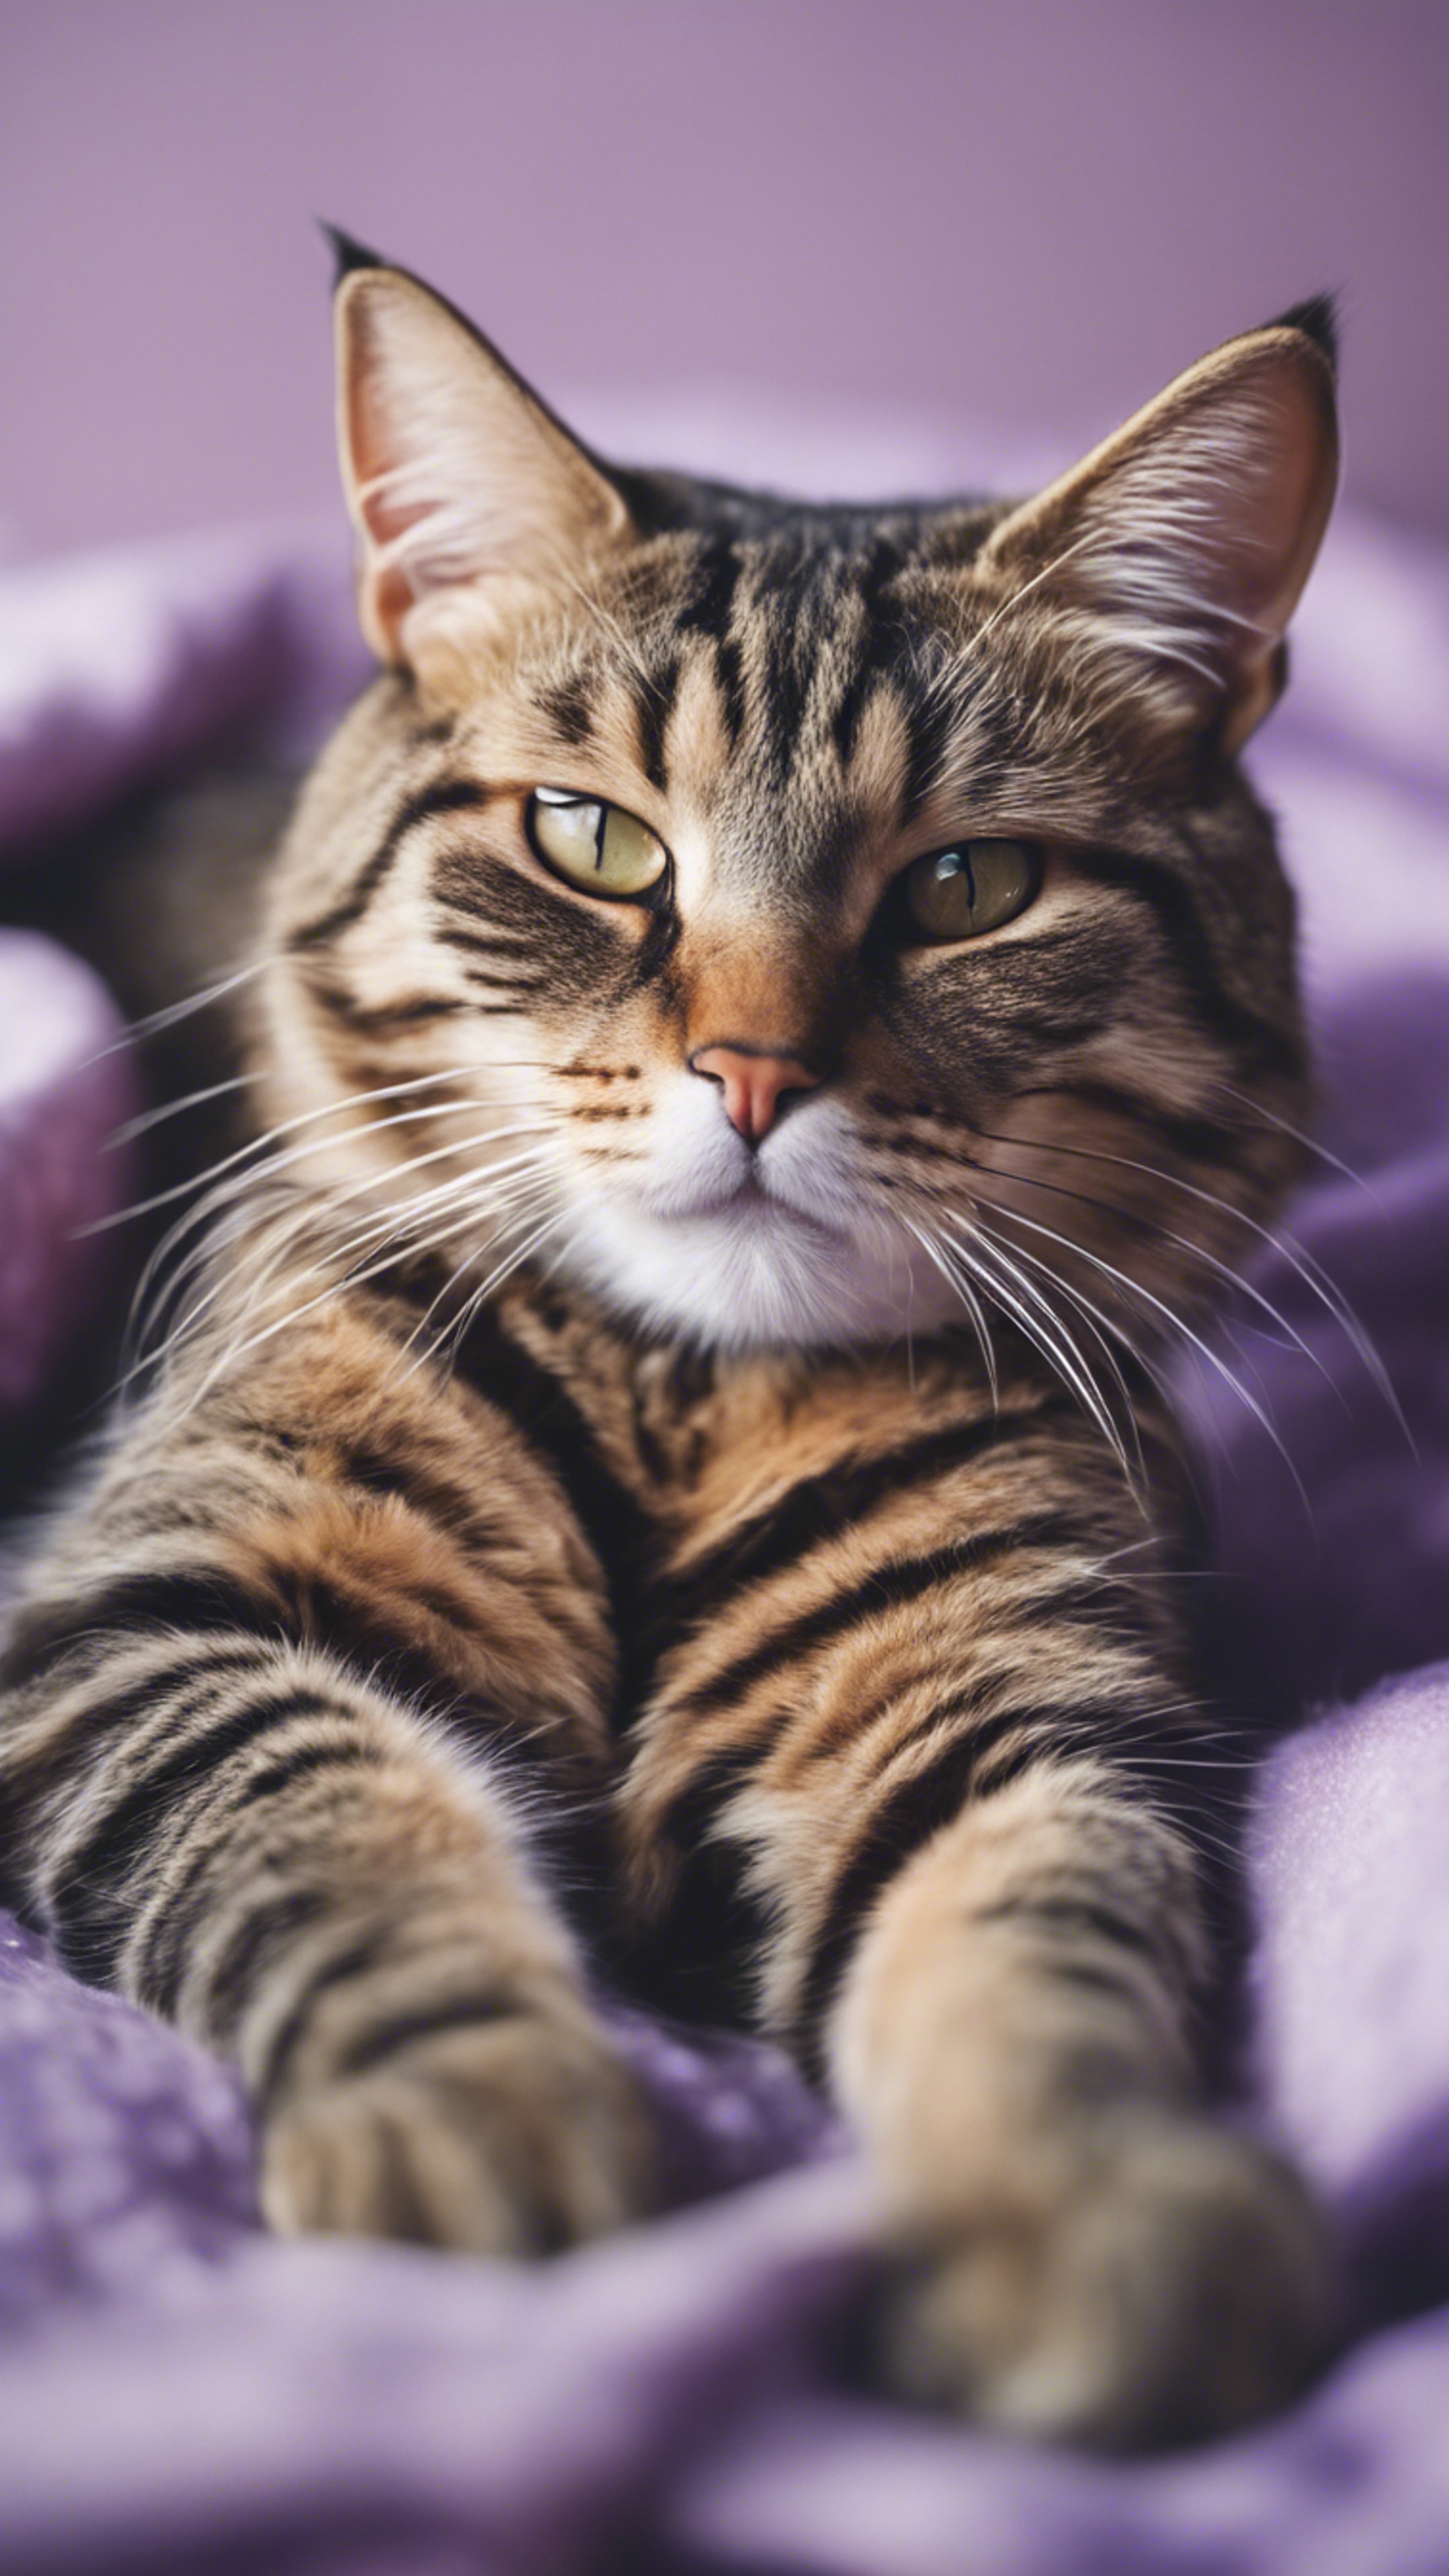 A candid portrait of a tabby cat lounging on a pastel purple blanket. Wallpaper[f4cf510d1a1d426195dc]